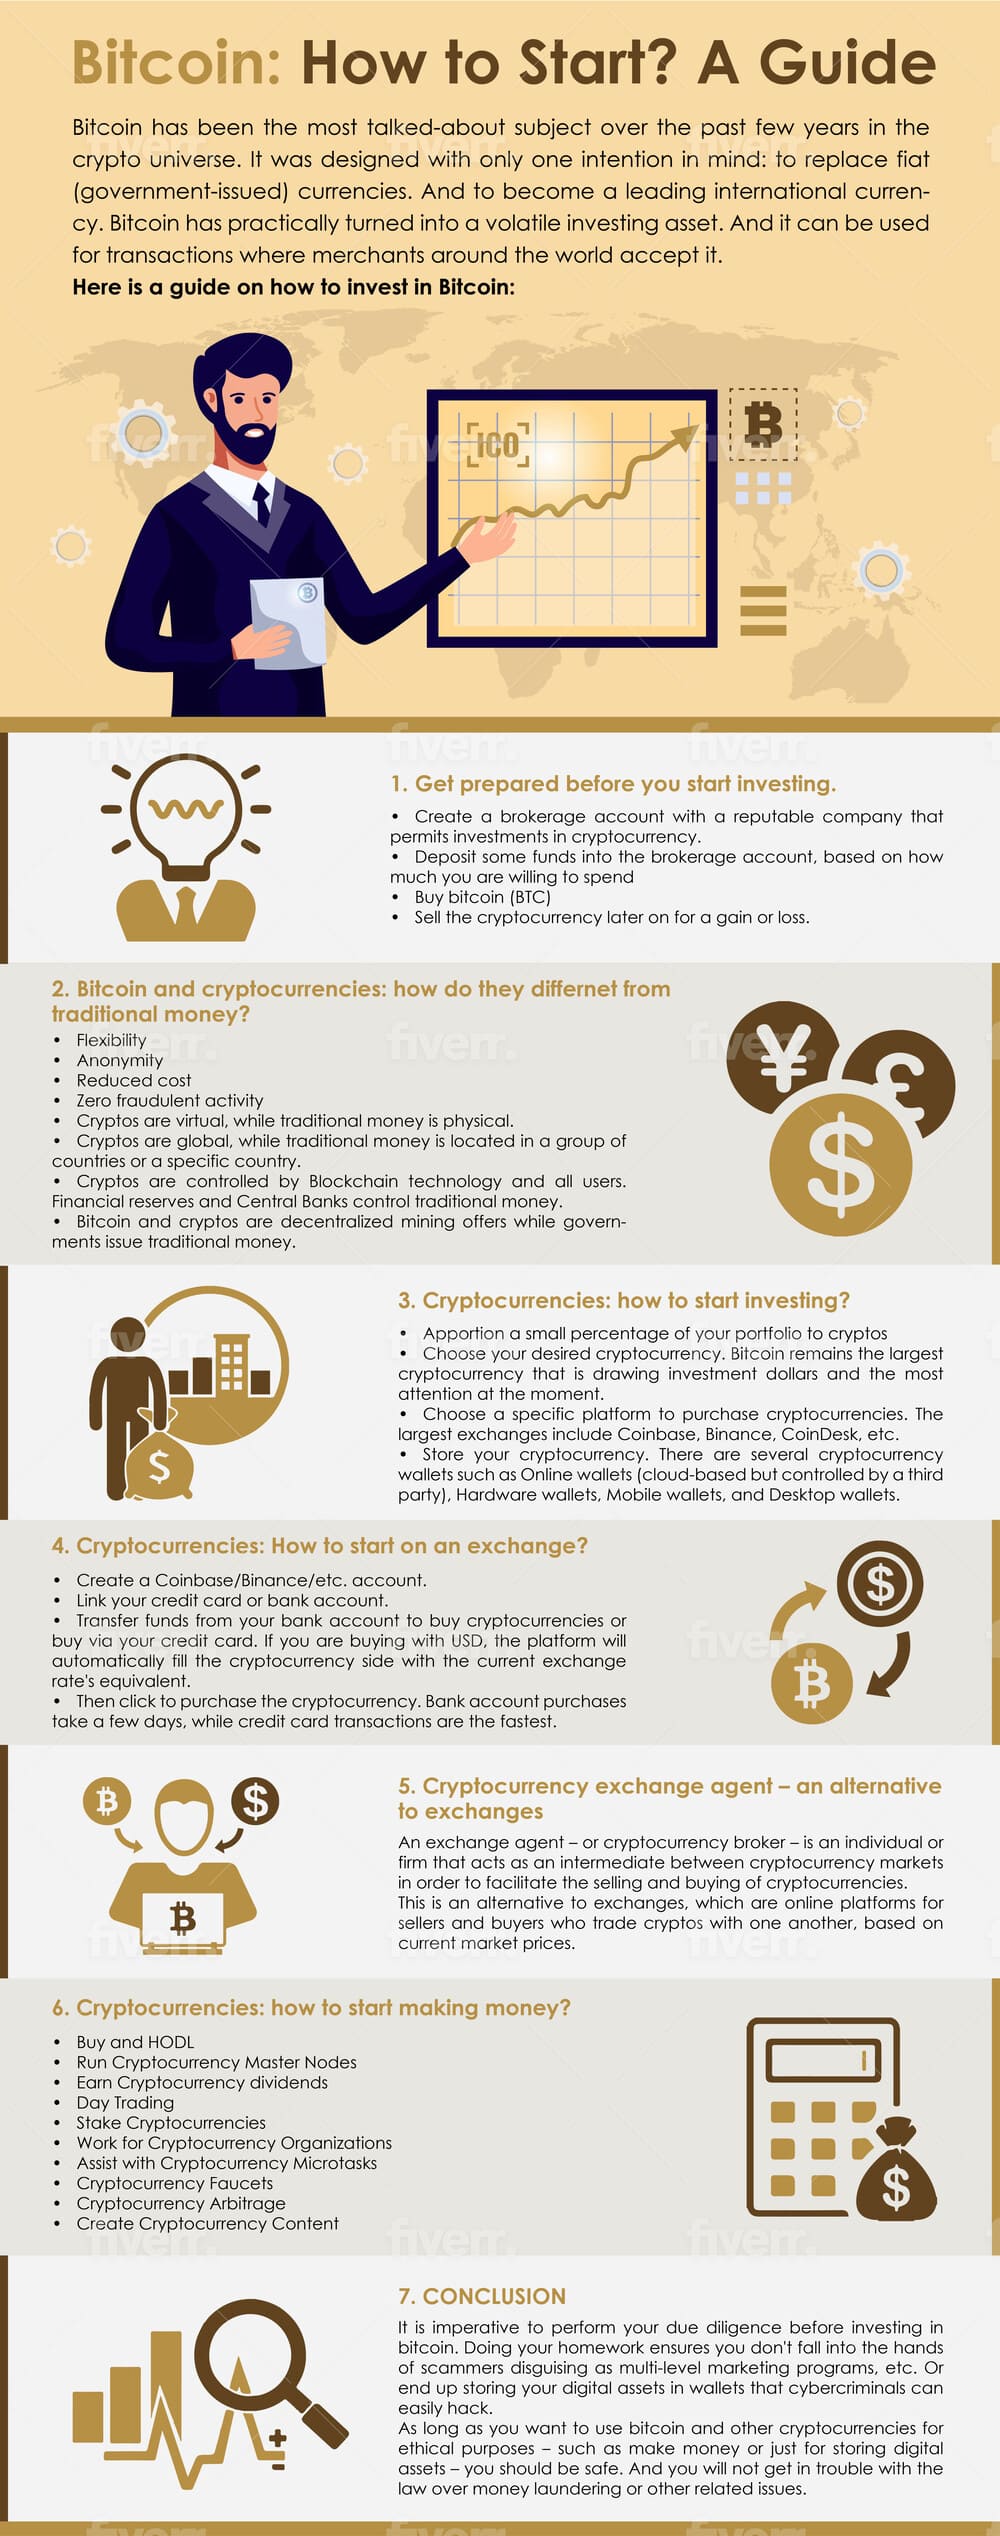 How to start a cryptocurrency: A guide